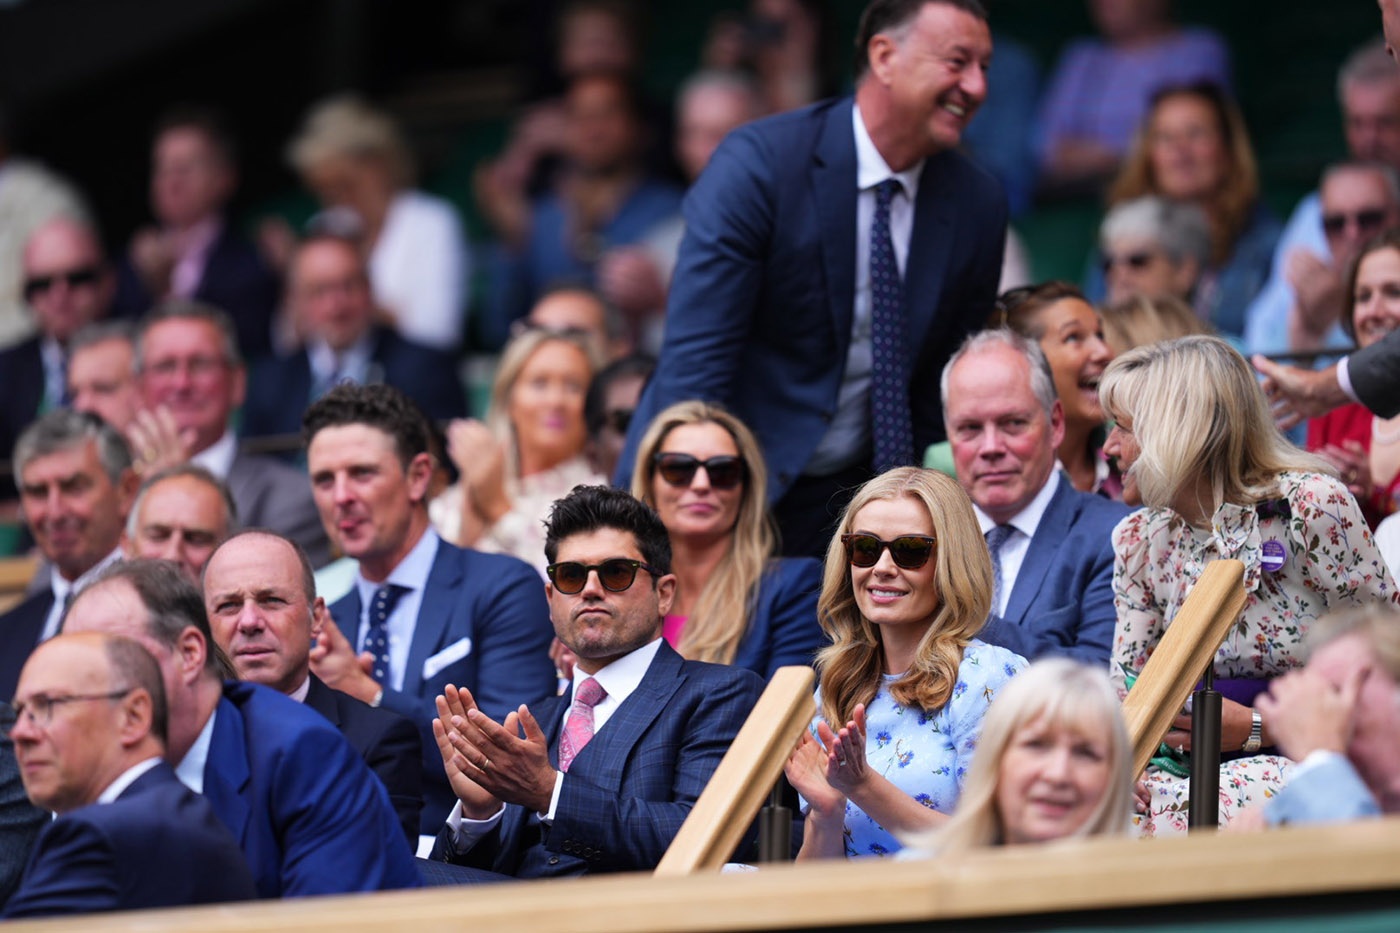 Inside Wimbledon's Royal Box: who gets invited and what are the perks?, London Evening Standard